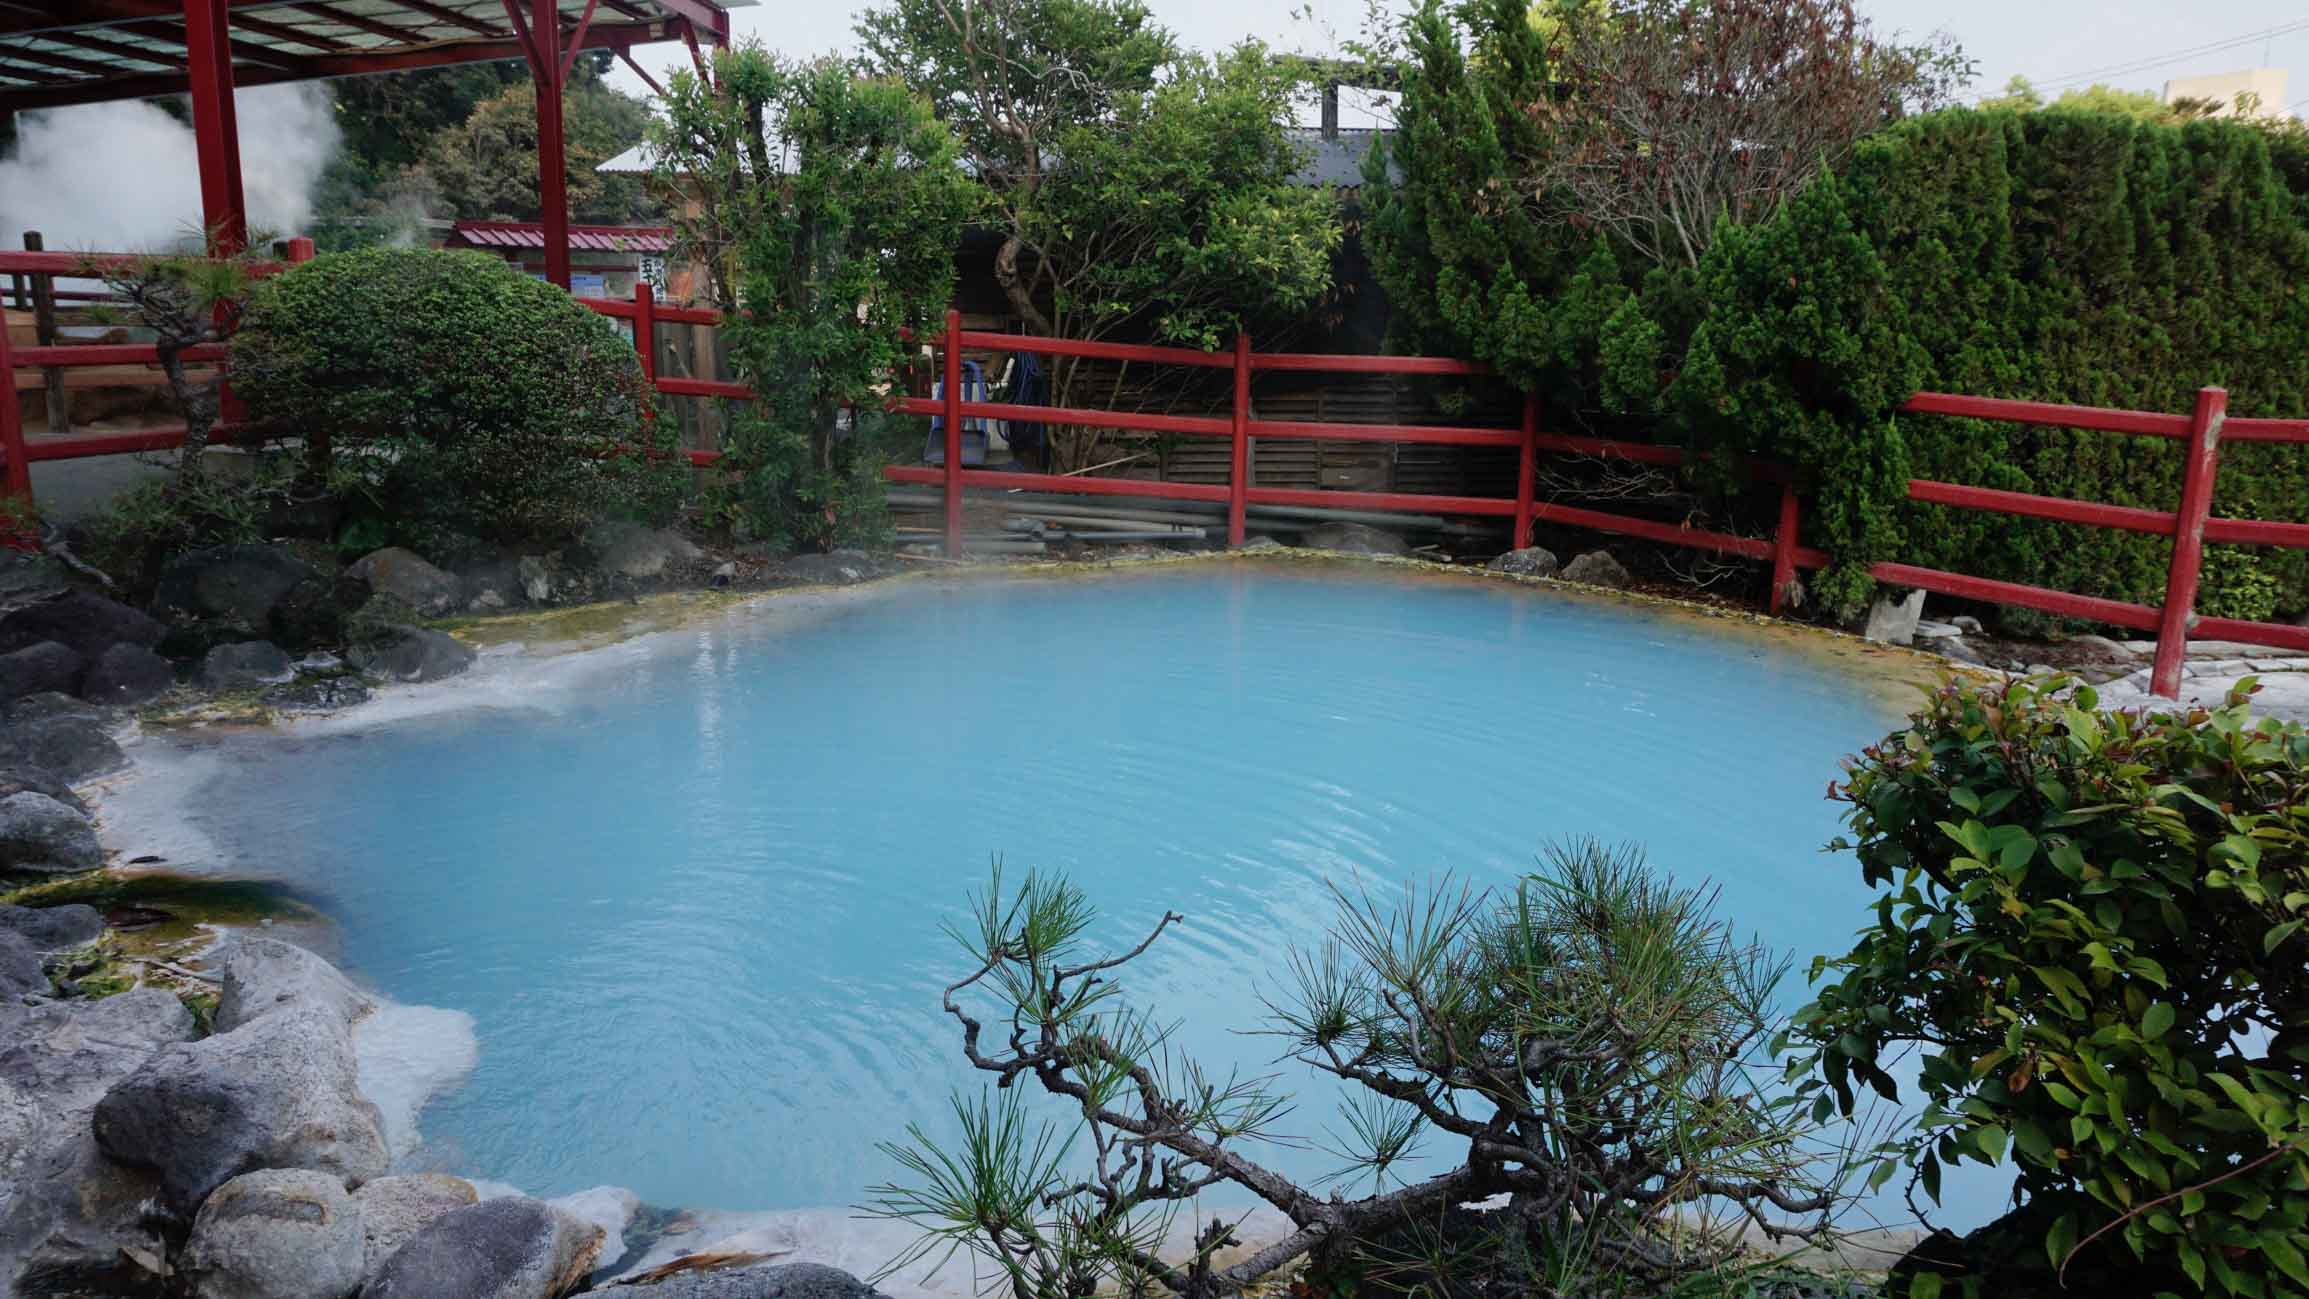 Beppu Japan - The Place To Be For All Onsen Lovers The Hells Of Beppu